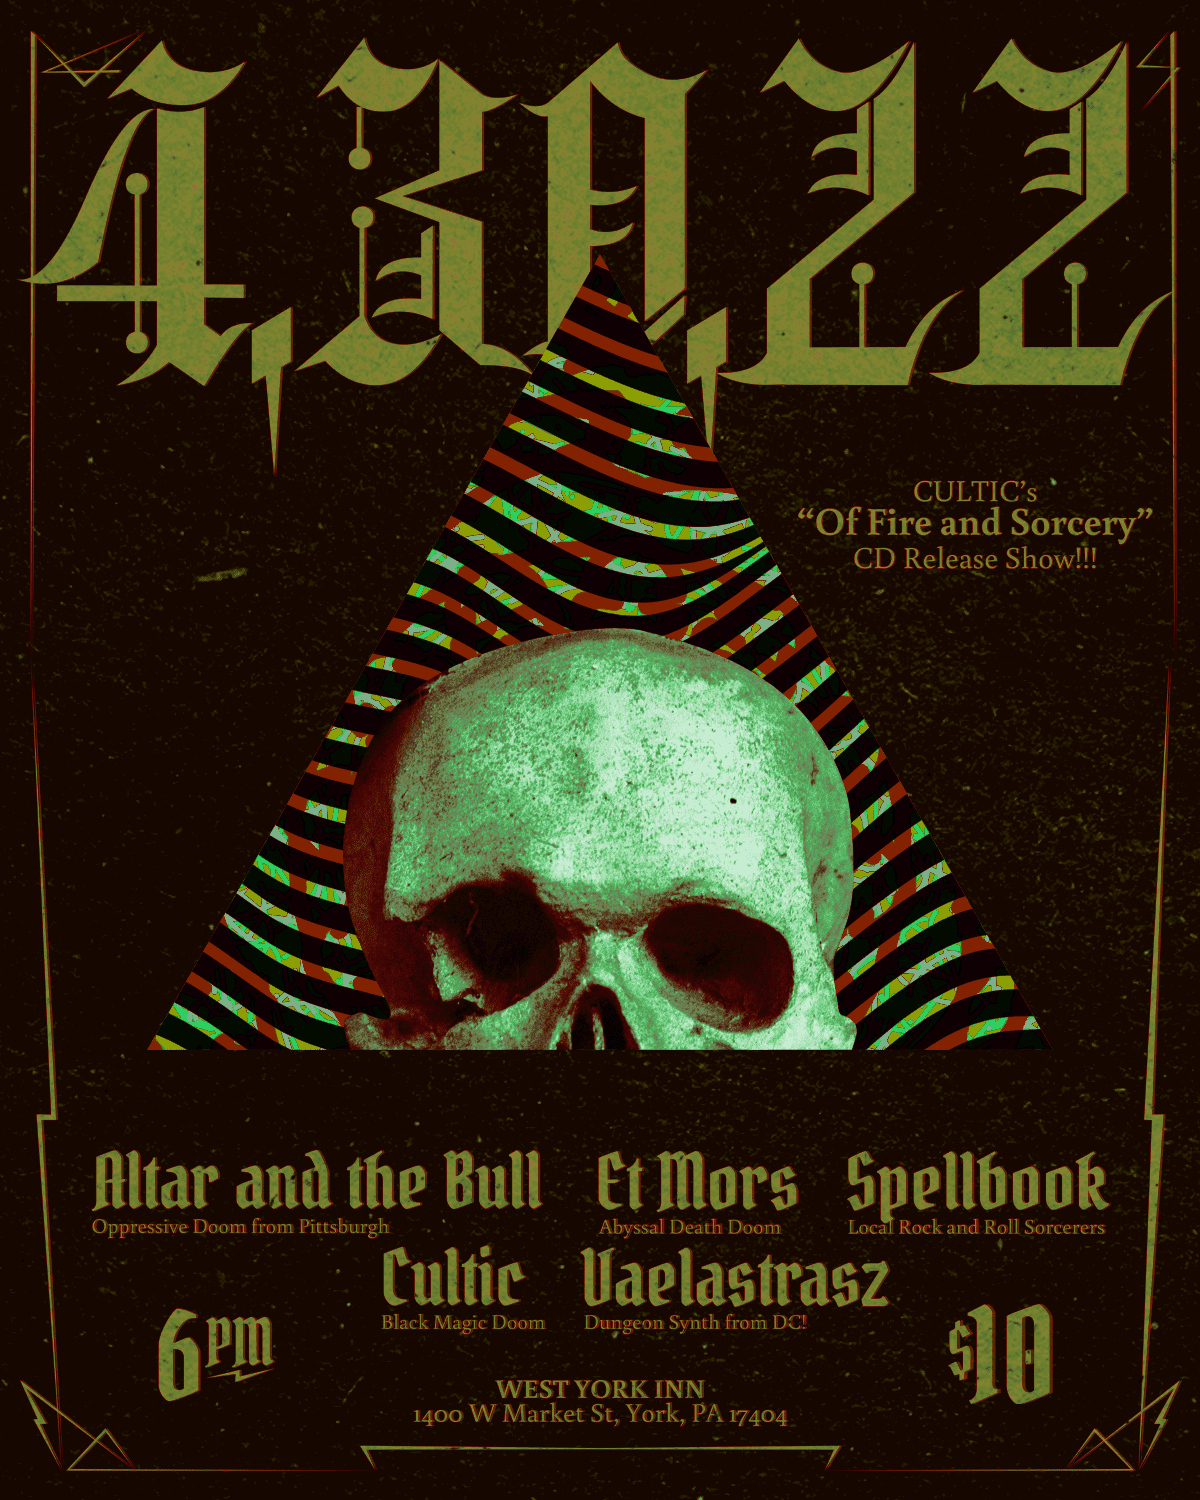 April 30, 2022 - Cultic Record Release Show Flyer